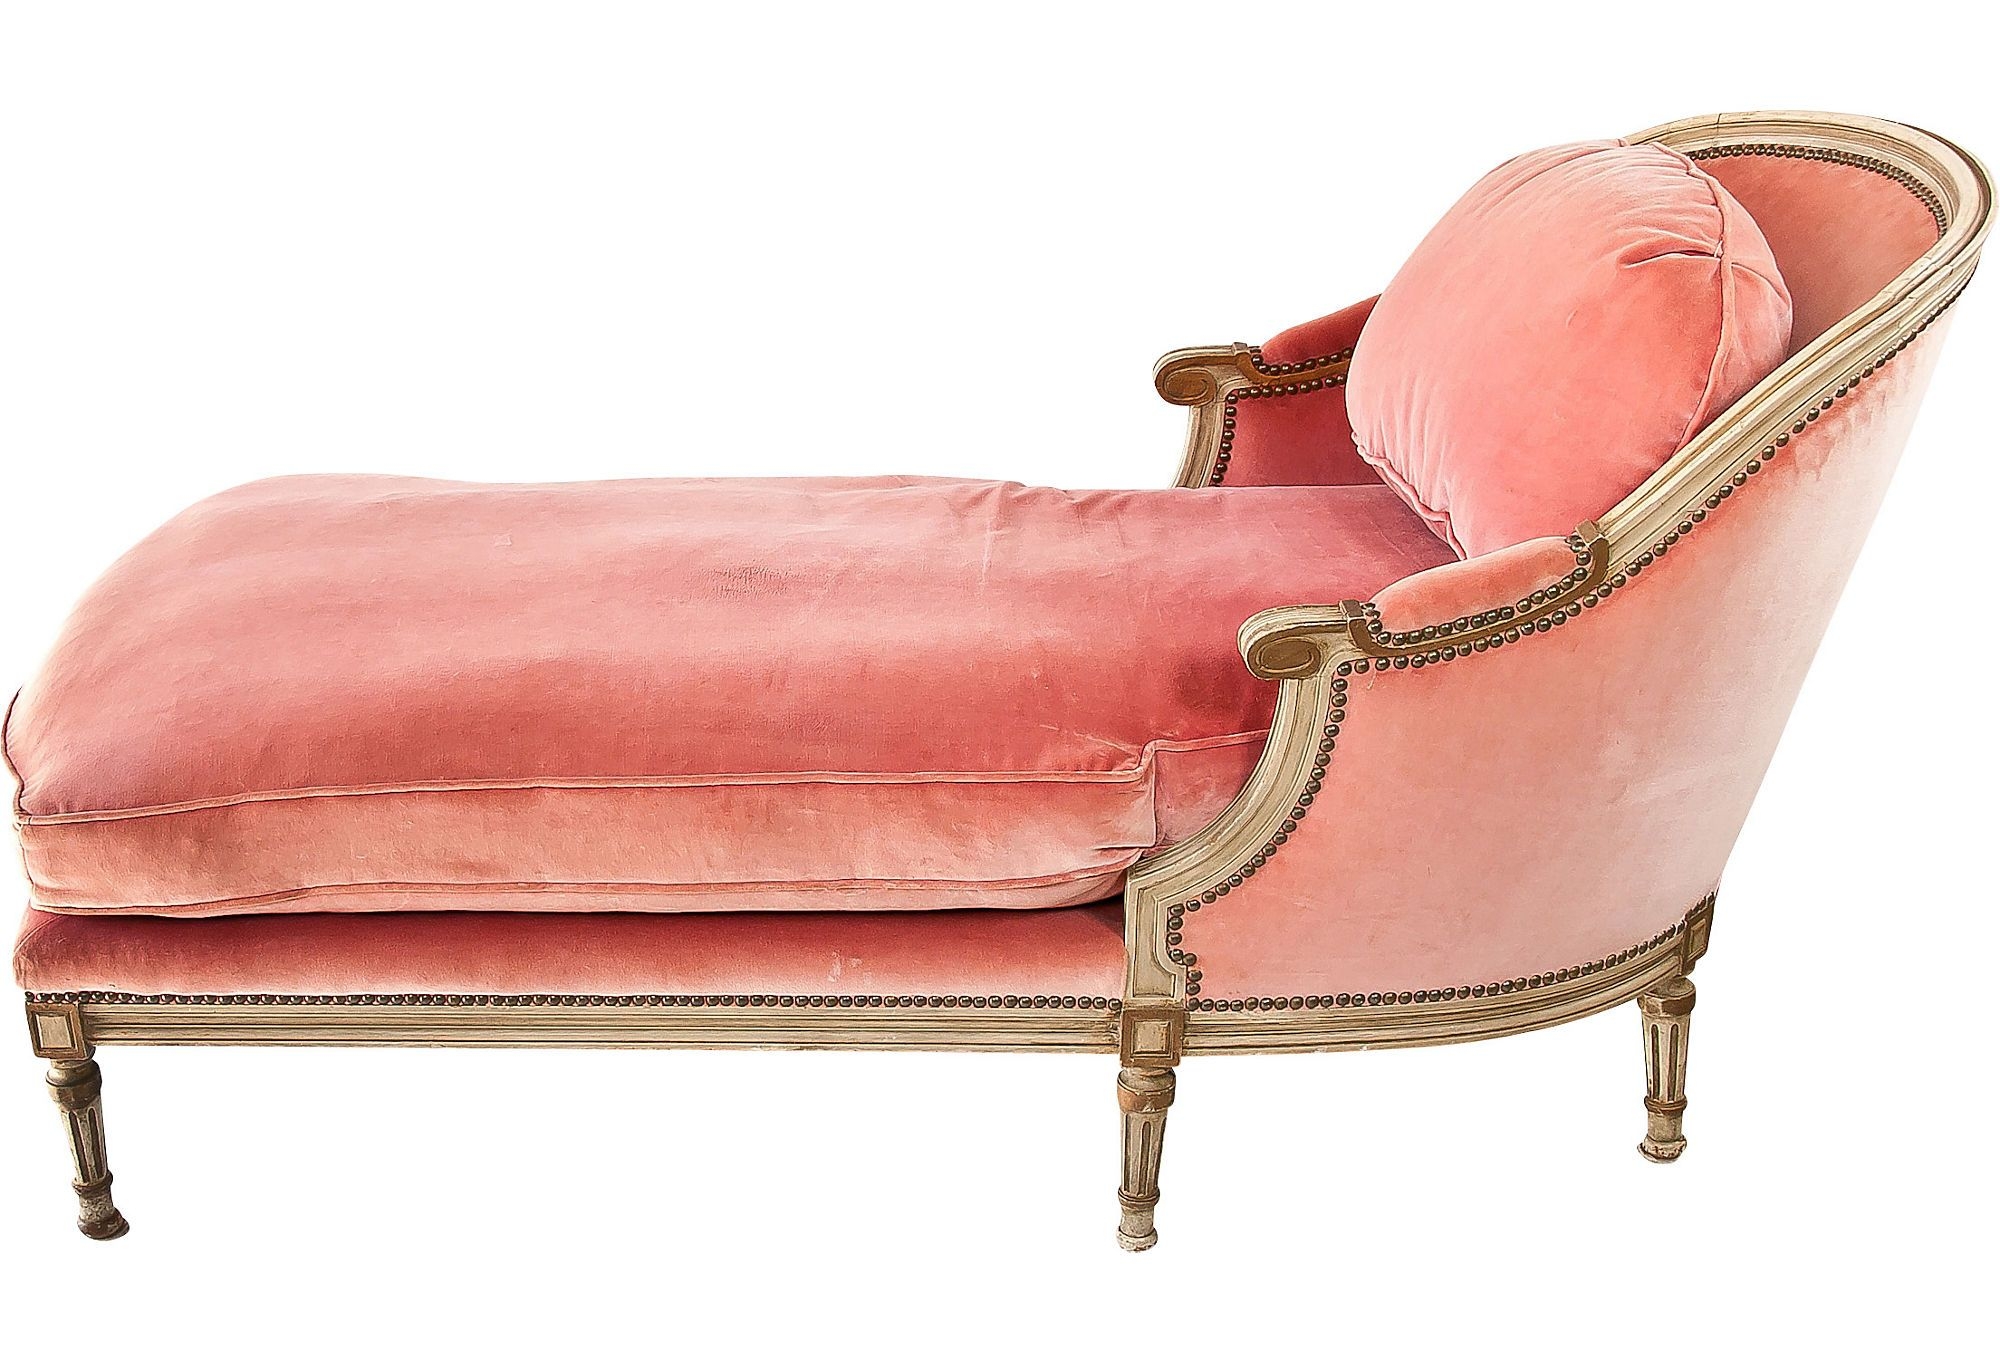 Classic chaise lounge